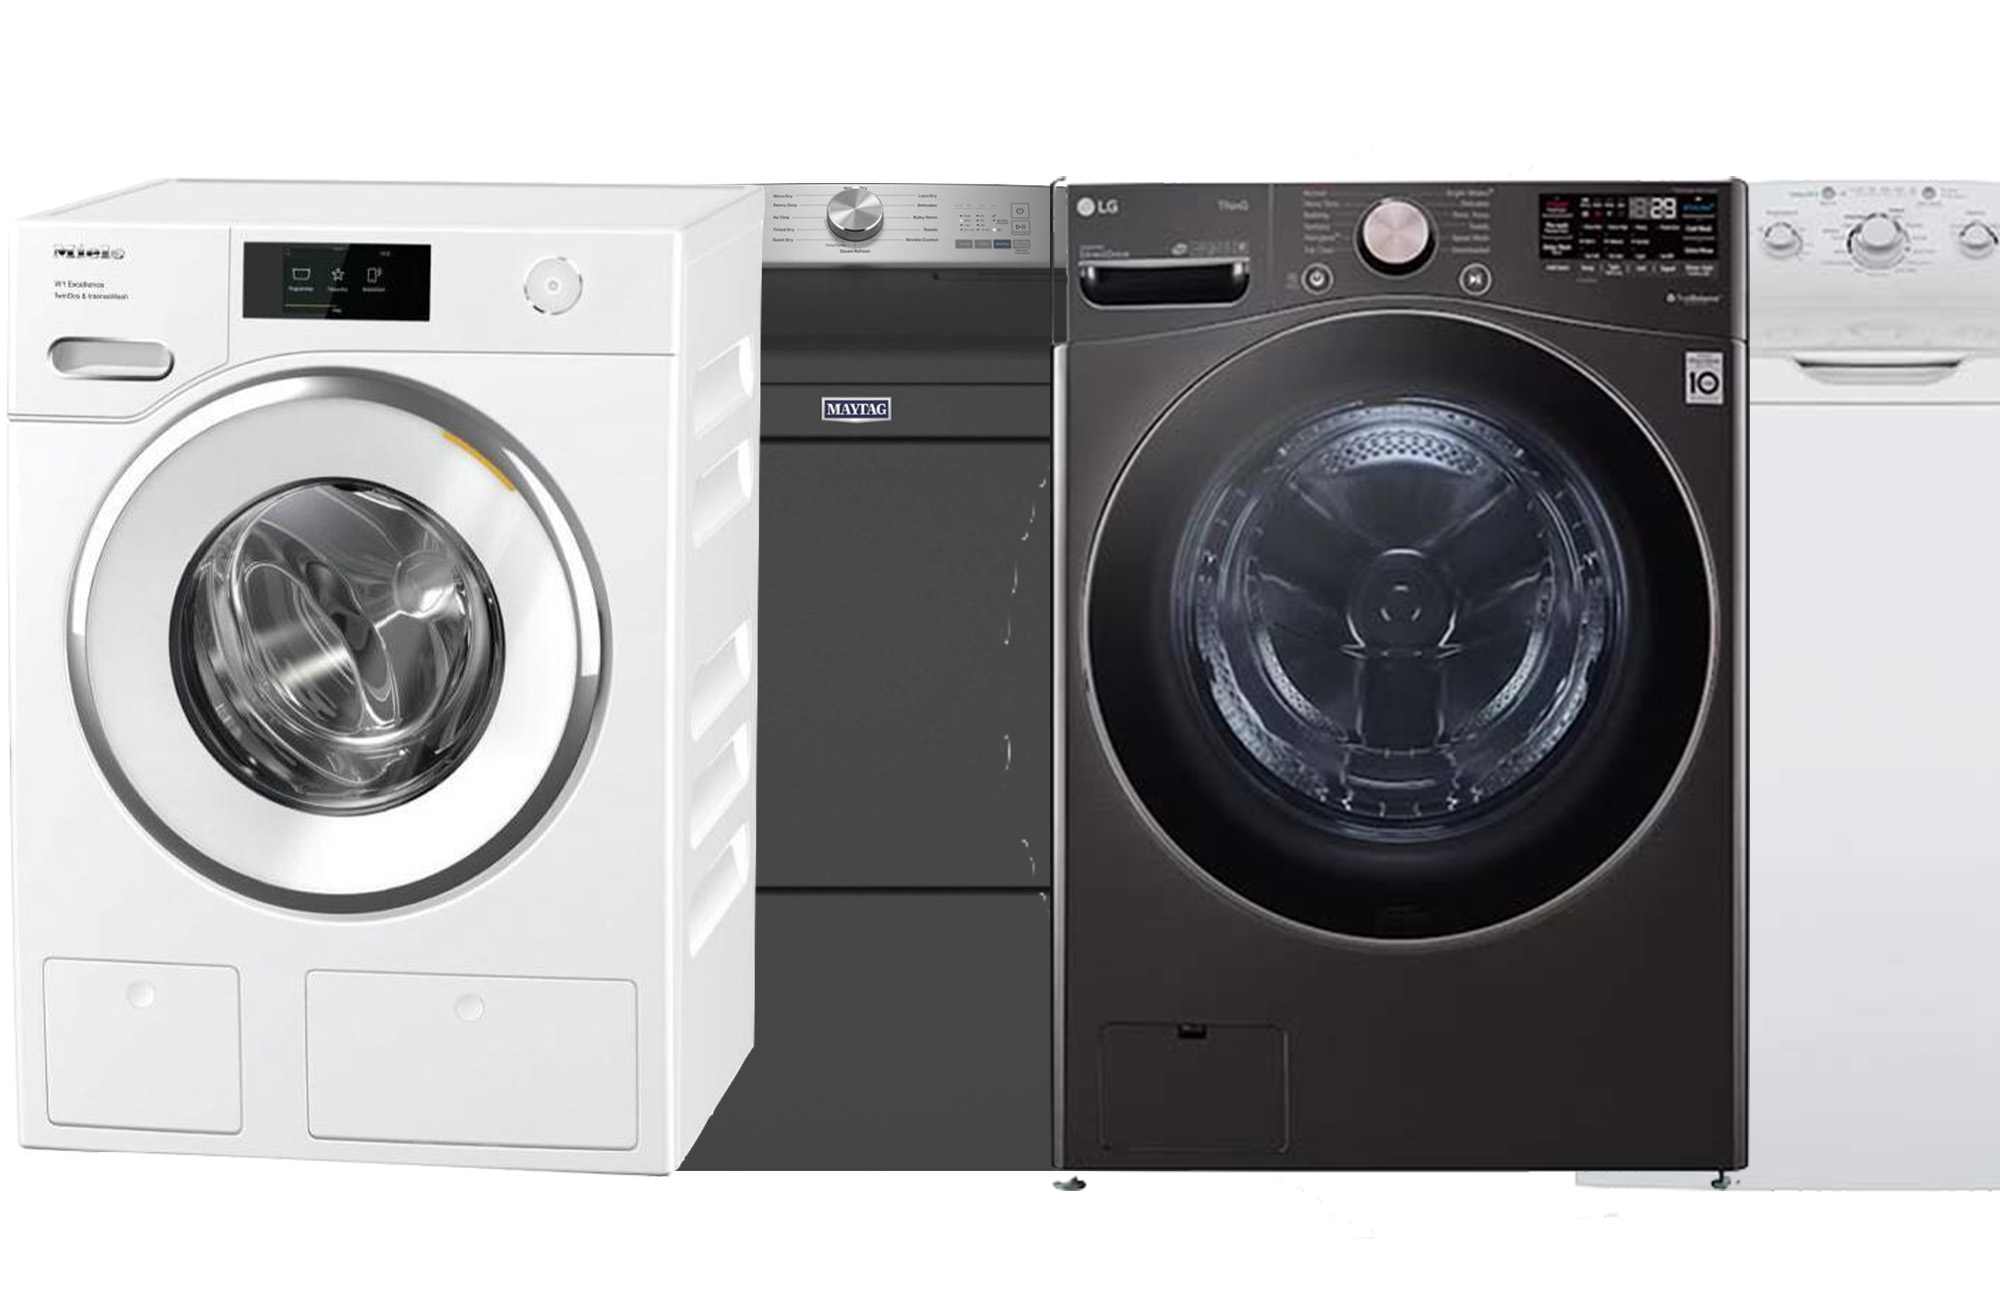 Washing Machine Sizes: How to Find the Right Size for Your Home